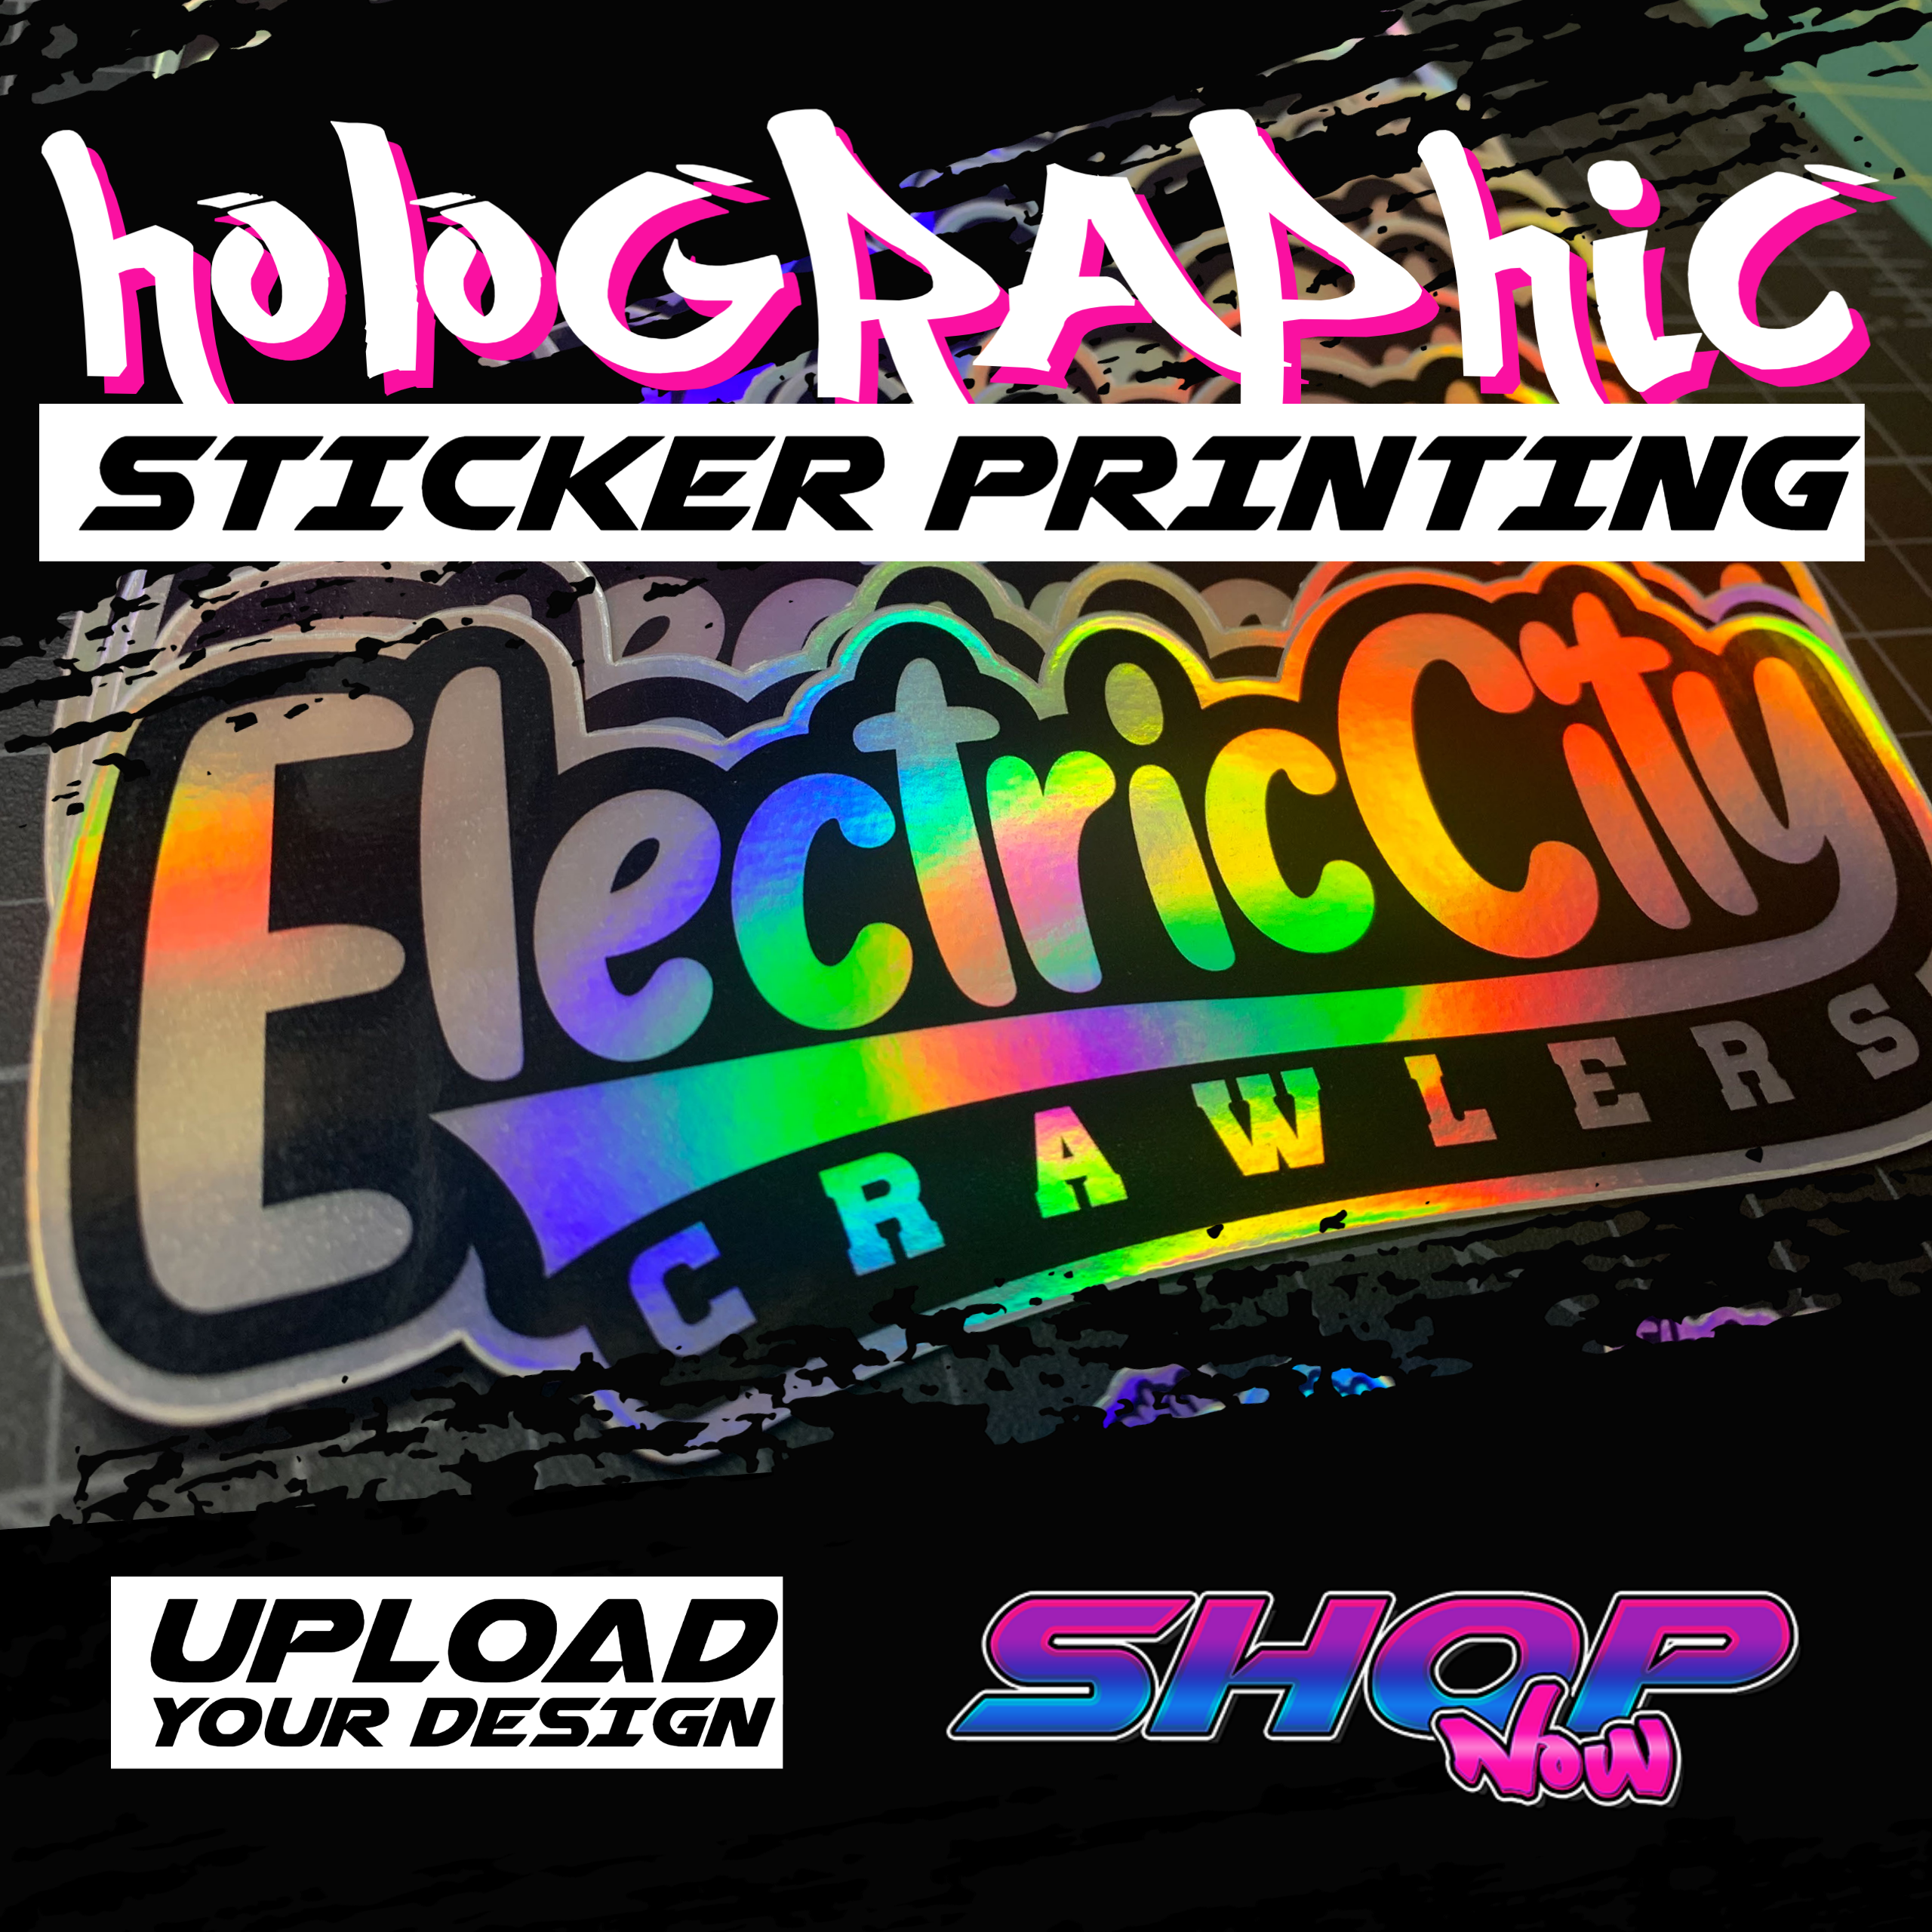 Sticker Printing - Holographic - RC SWAG - Stickers, T-Shirts